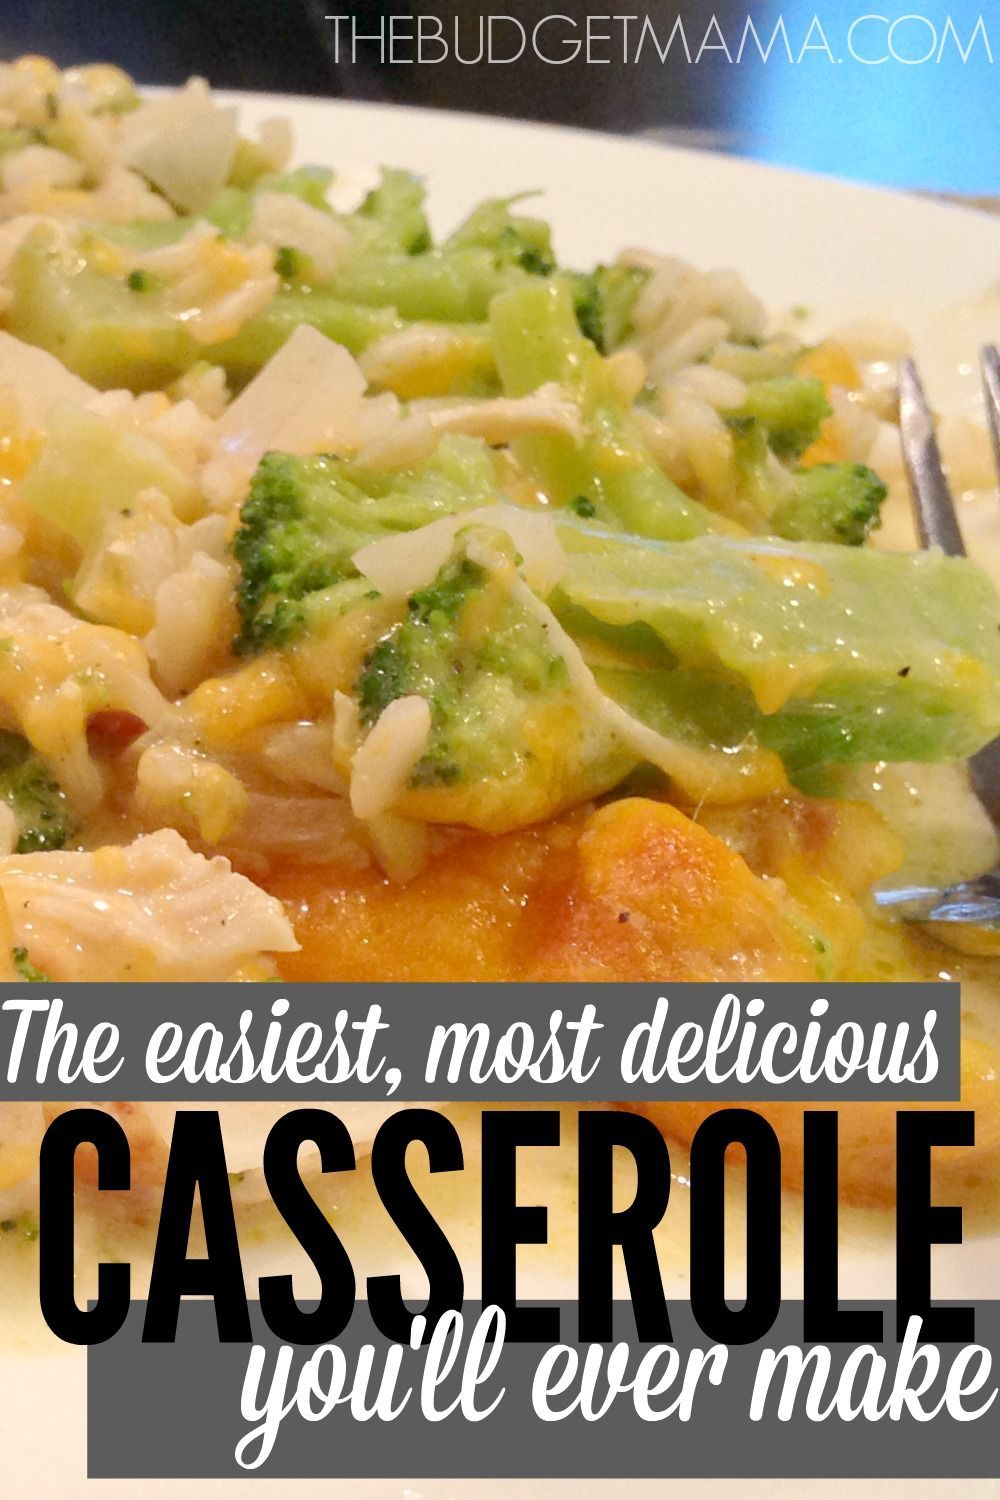 Need to throw something together quick to feed your family? This super easy, clean eating casserole recipe will help you get